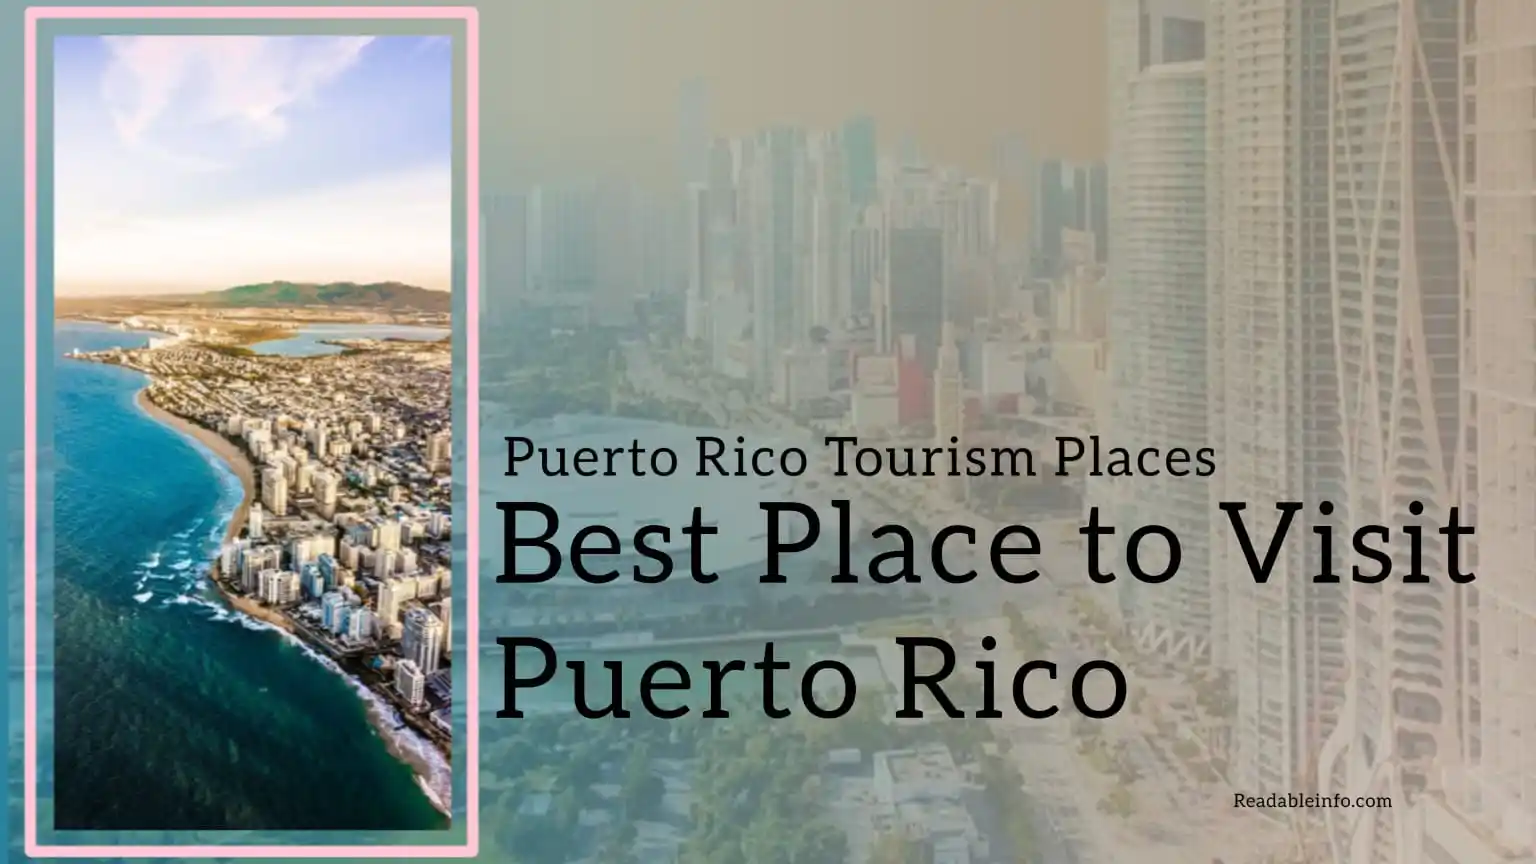 You are currently viewing Best Place To Visit Puerto Rico (Puerto Rico Tourism Places)